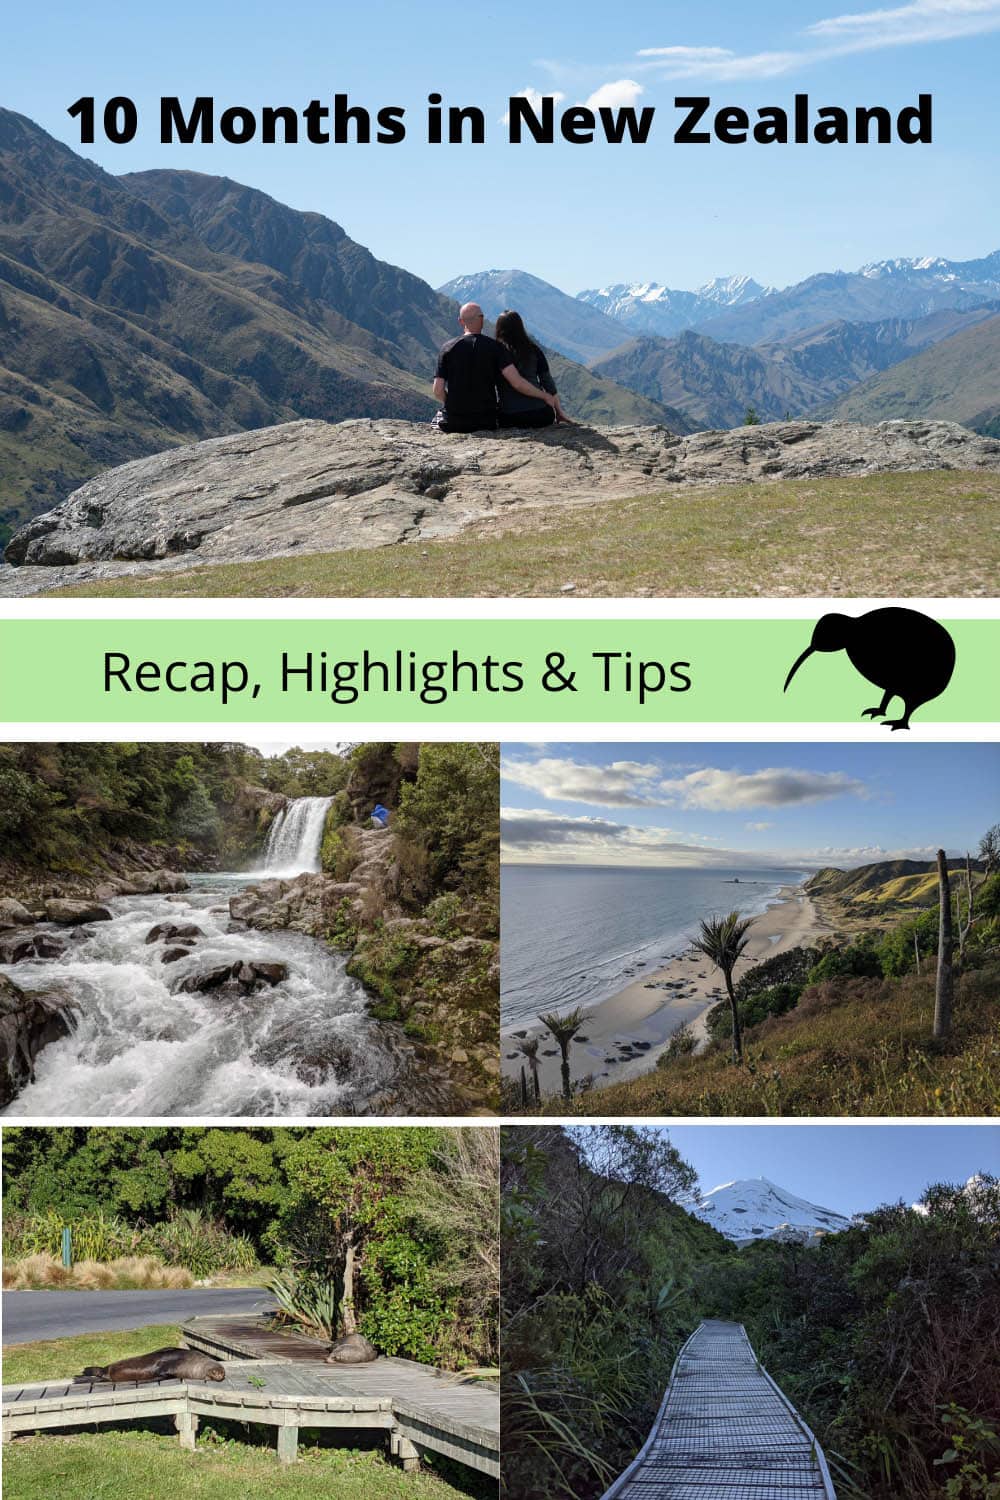 10 Months in New Zealand: Highlights of Our Unexpected Extended Trip